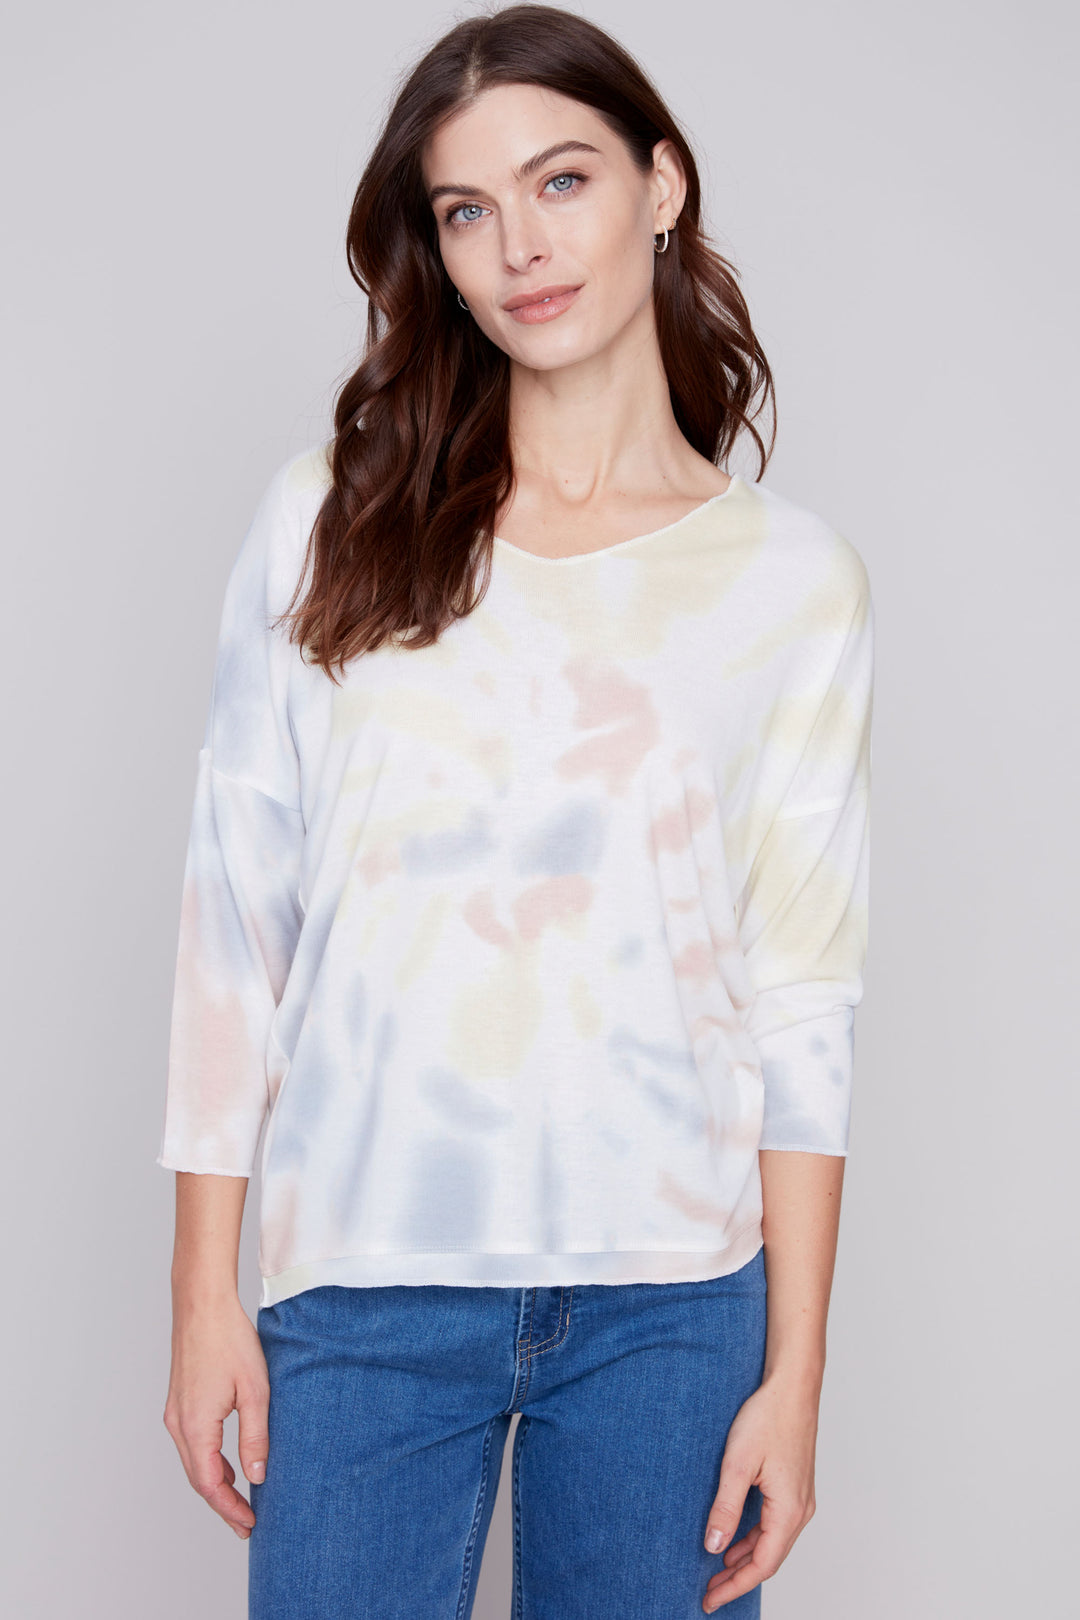 This effortless and comfortable tie dye top is the perfect addition for your summer wardrobe. 